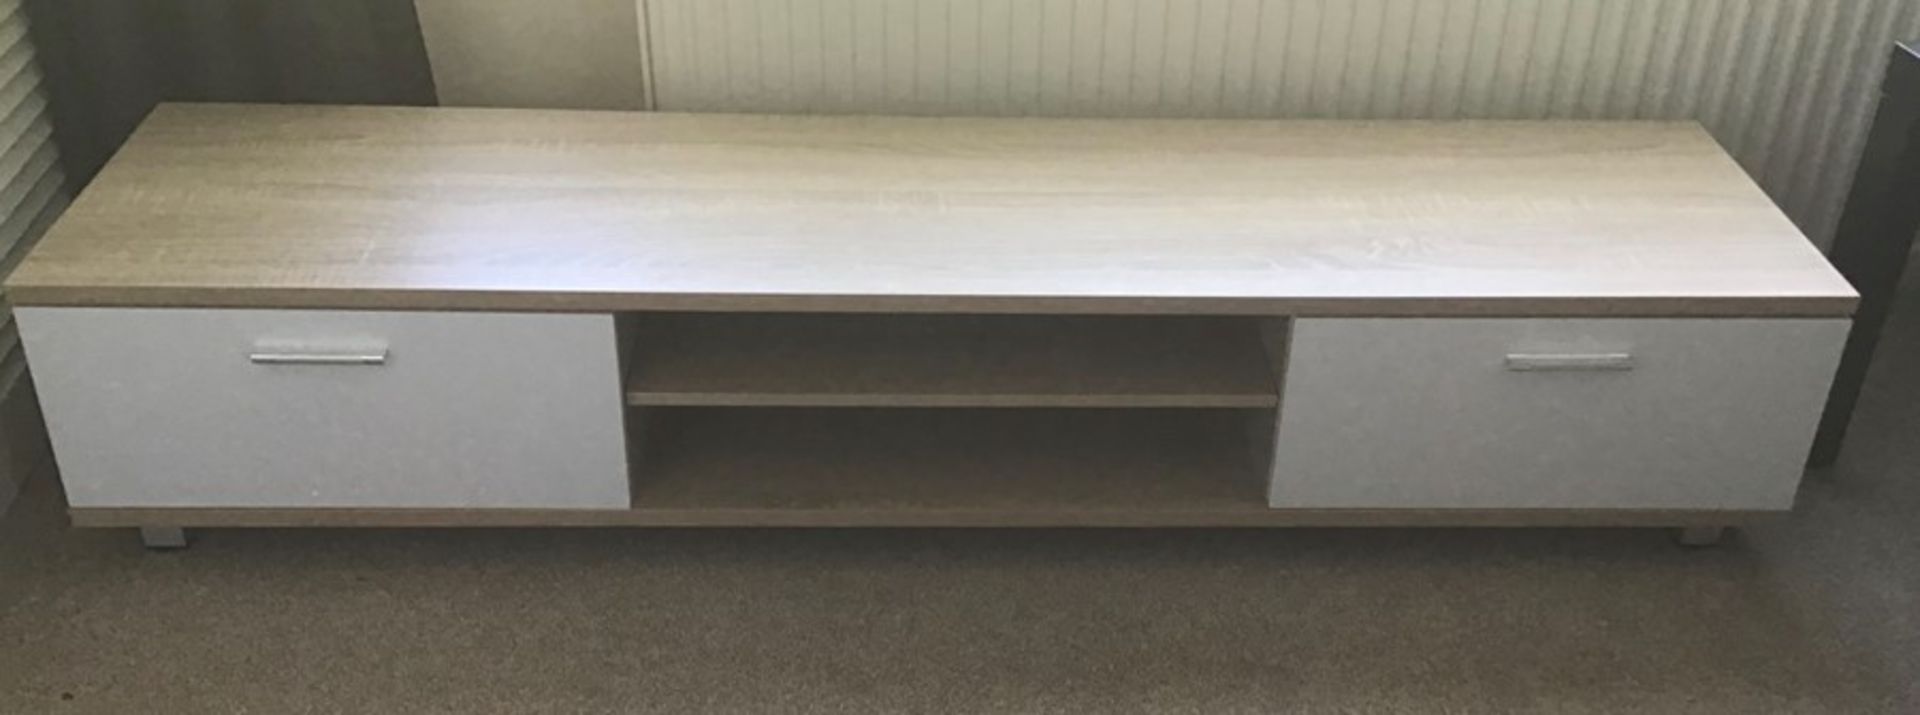 Oak and white 168cm TV stand, brand new, flat packed and boxed. RRP Circa £100.00 | 1x Box